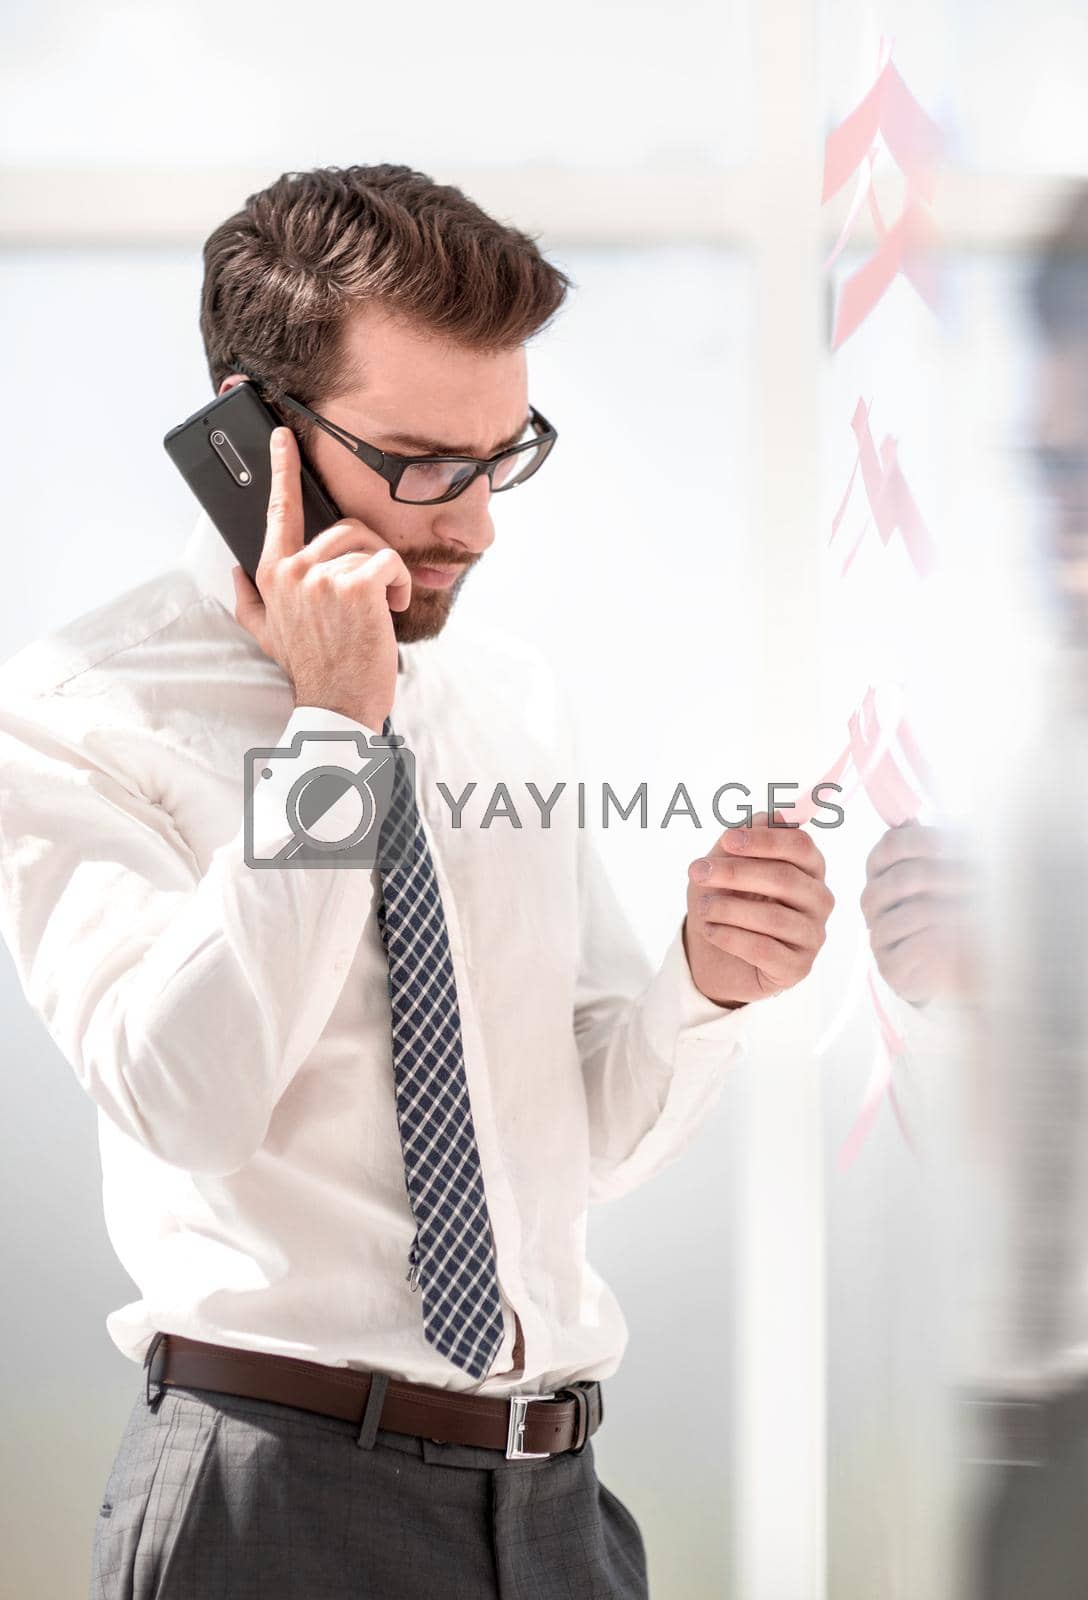 Royalty free image of serious businessman talking on smartphone. by asdf